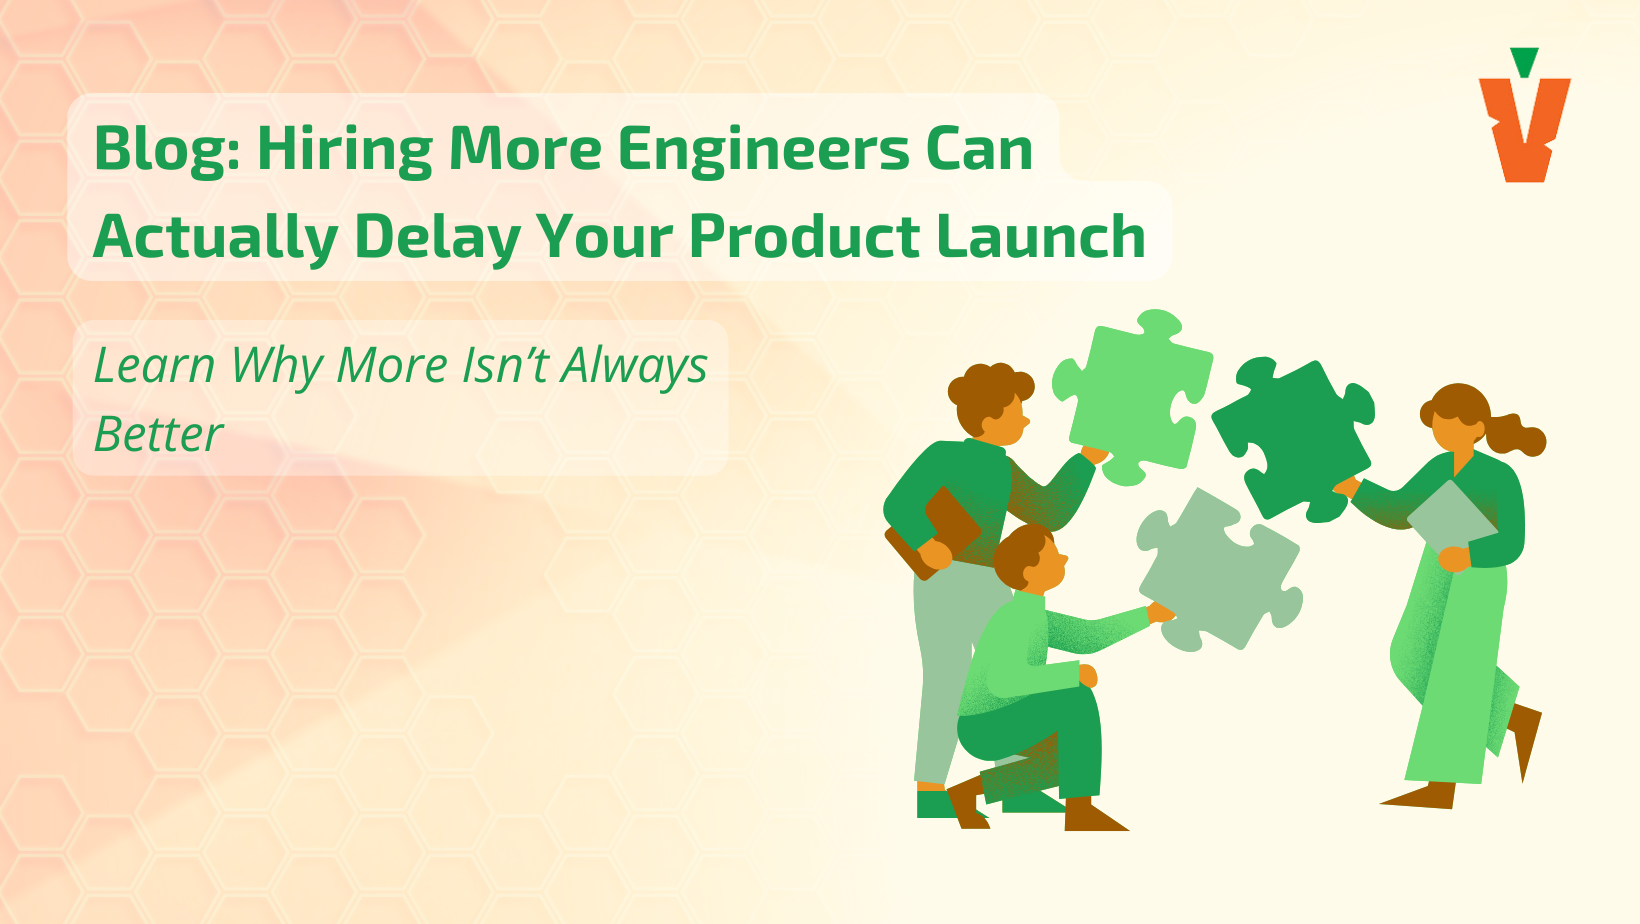 Hiring More Engineers Can Actually Delay Your Product Launch